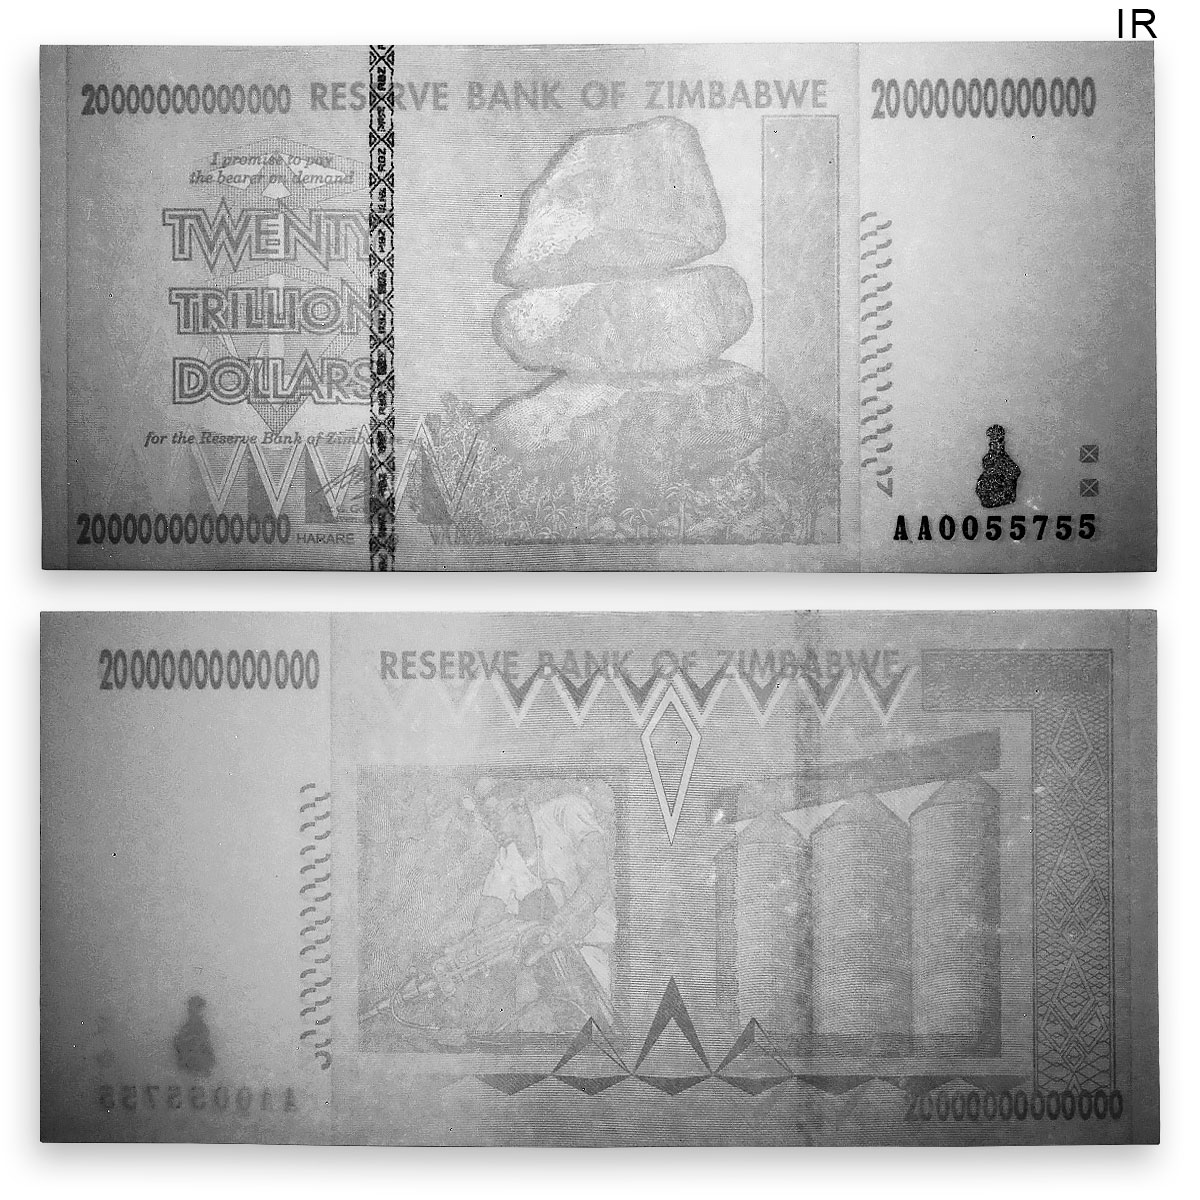 ZIMBABWE 20 TRILLION DOLLARS AA Series BANKNOTE CURRENCY UNCIRCULATED 2008